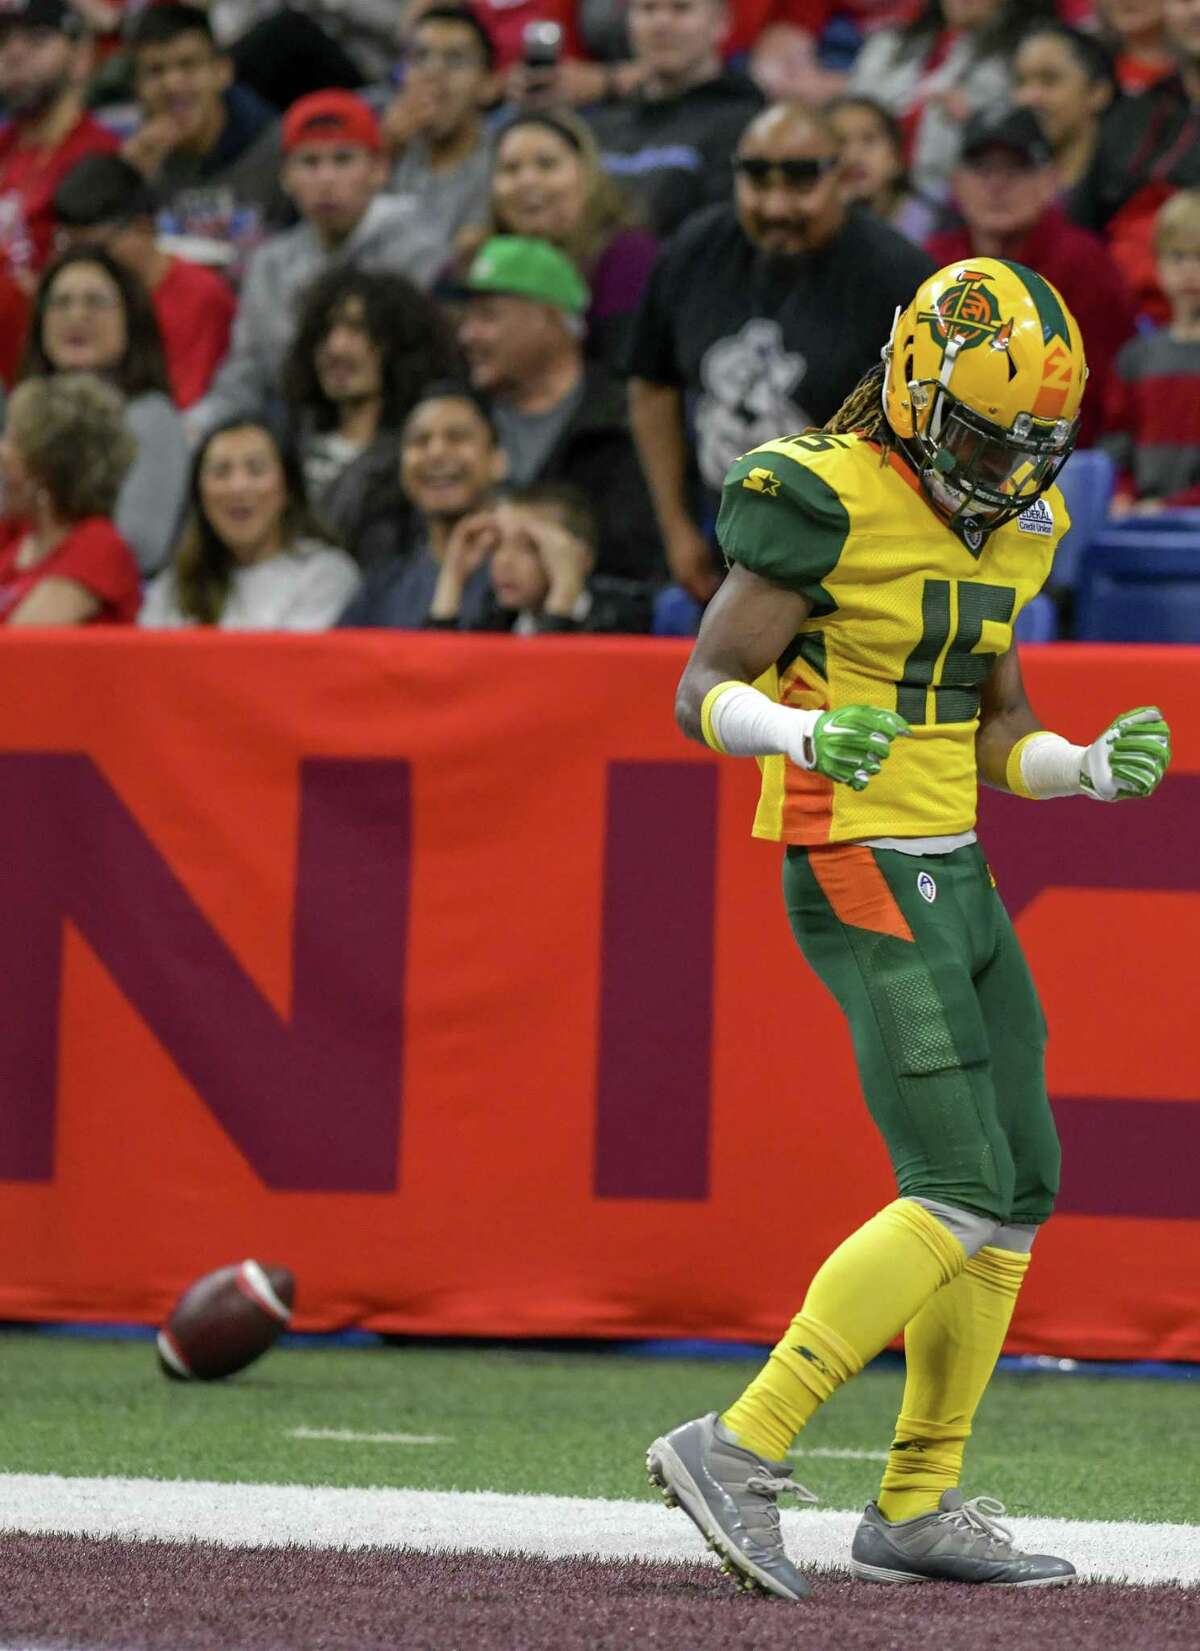 Arizona Hotshots Rasahd Ross (15) celebrates after scoring a touchdown against the San Antonio Commanders on March 31, 2019 at the Alamodome.